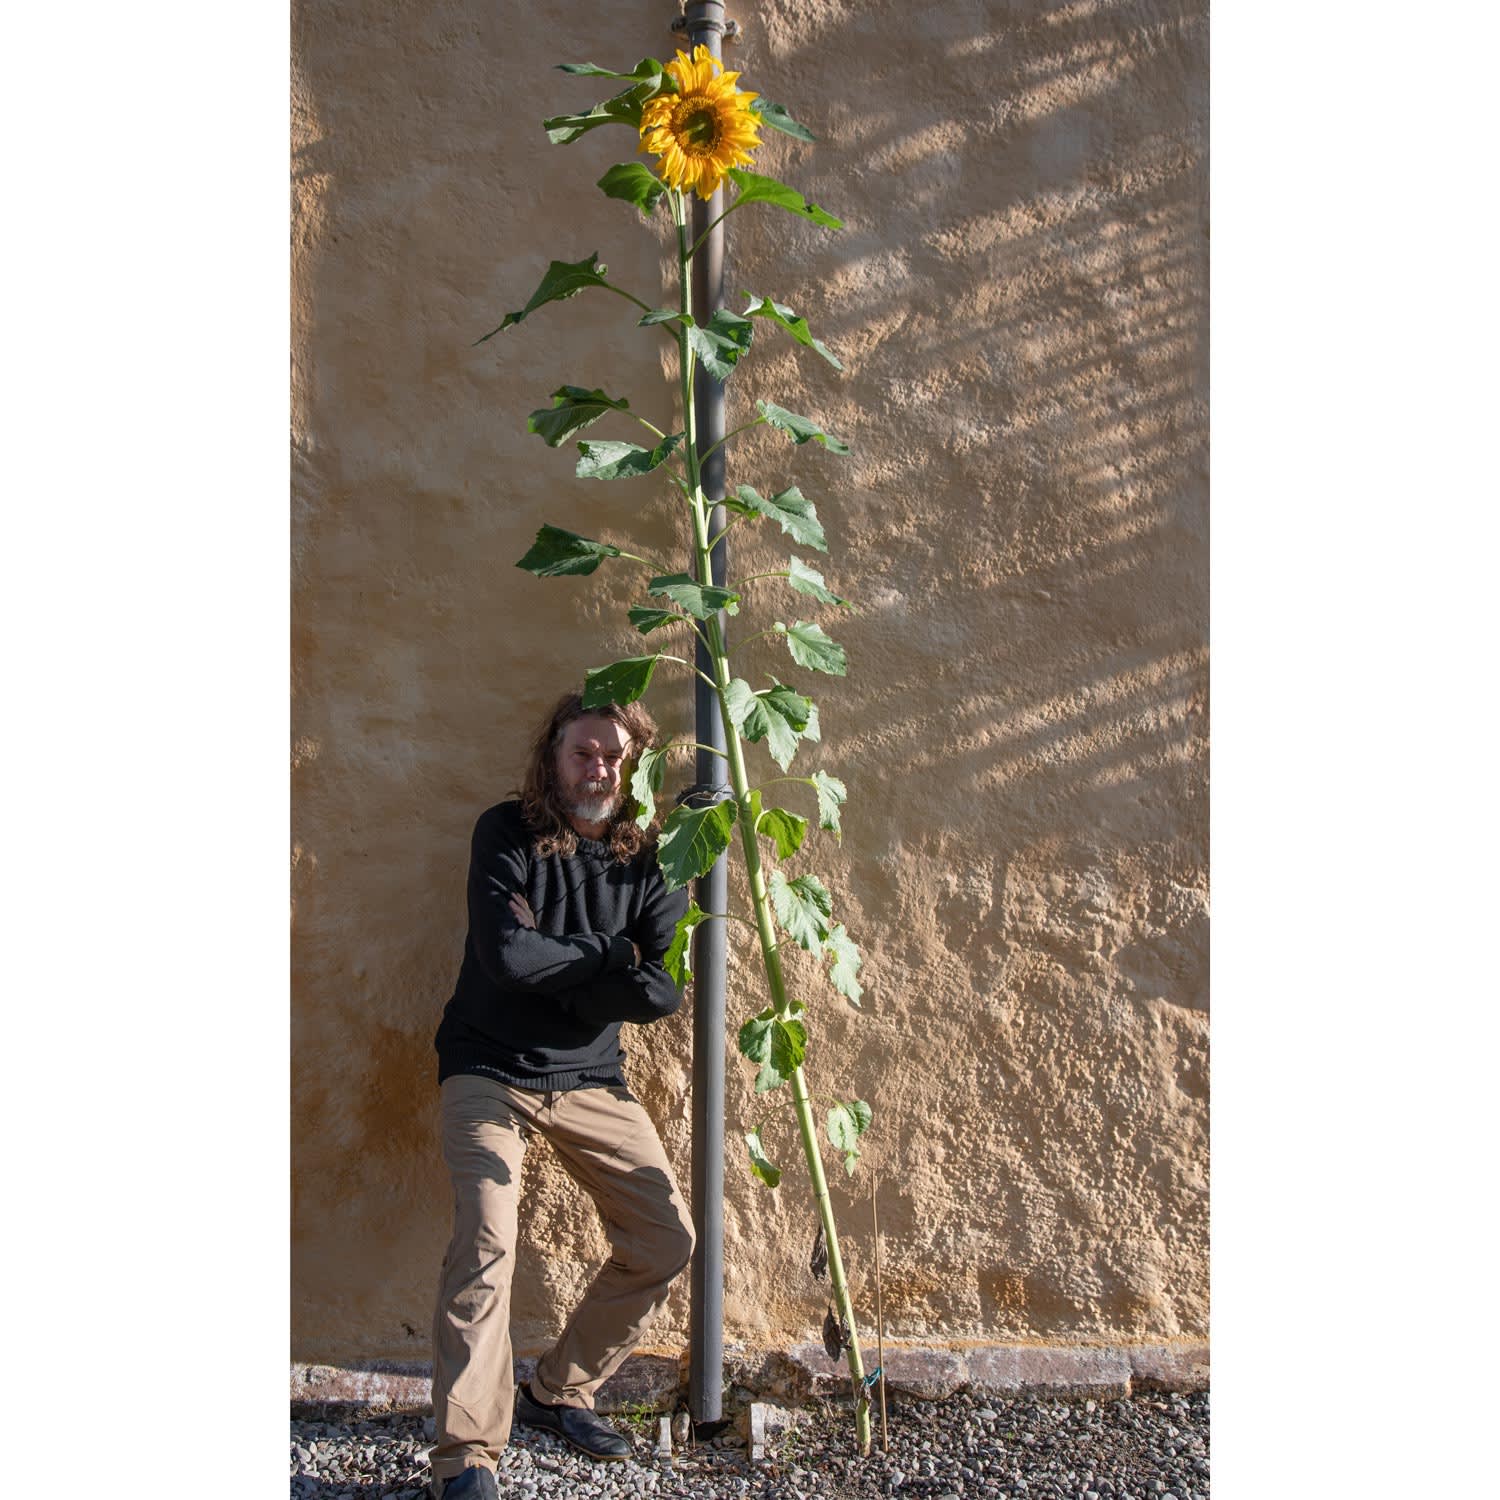 Tony with our 'Giant Russian' sunflower. 2.8m